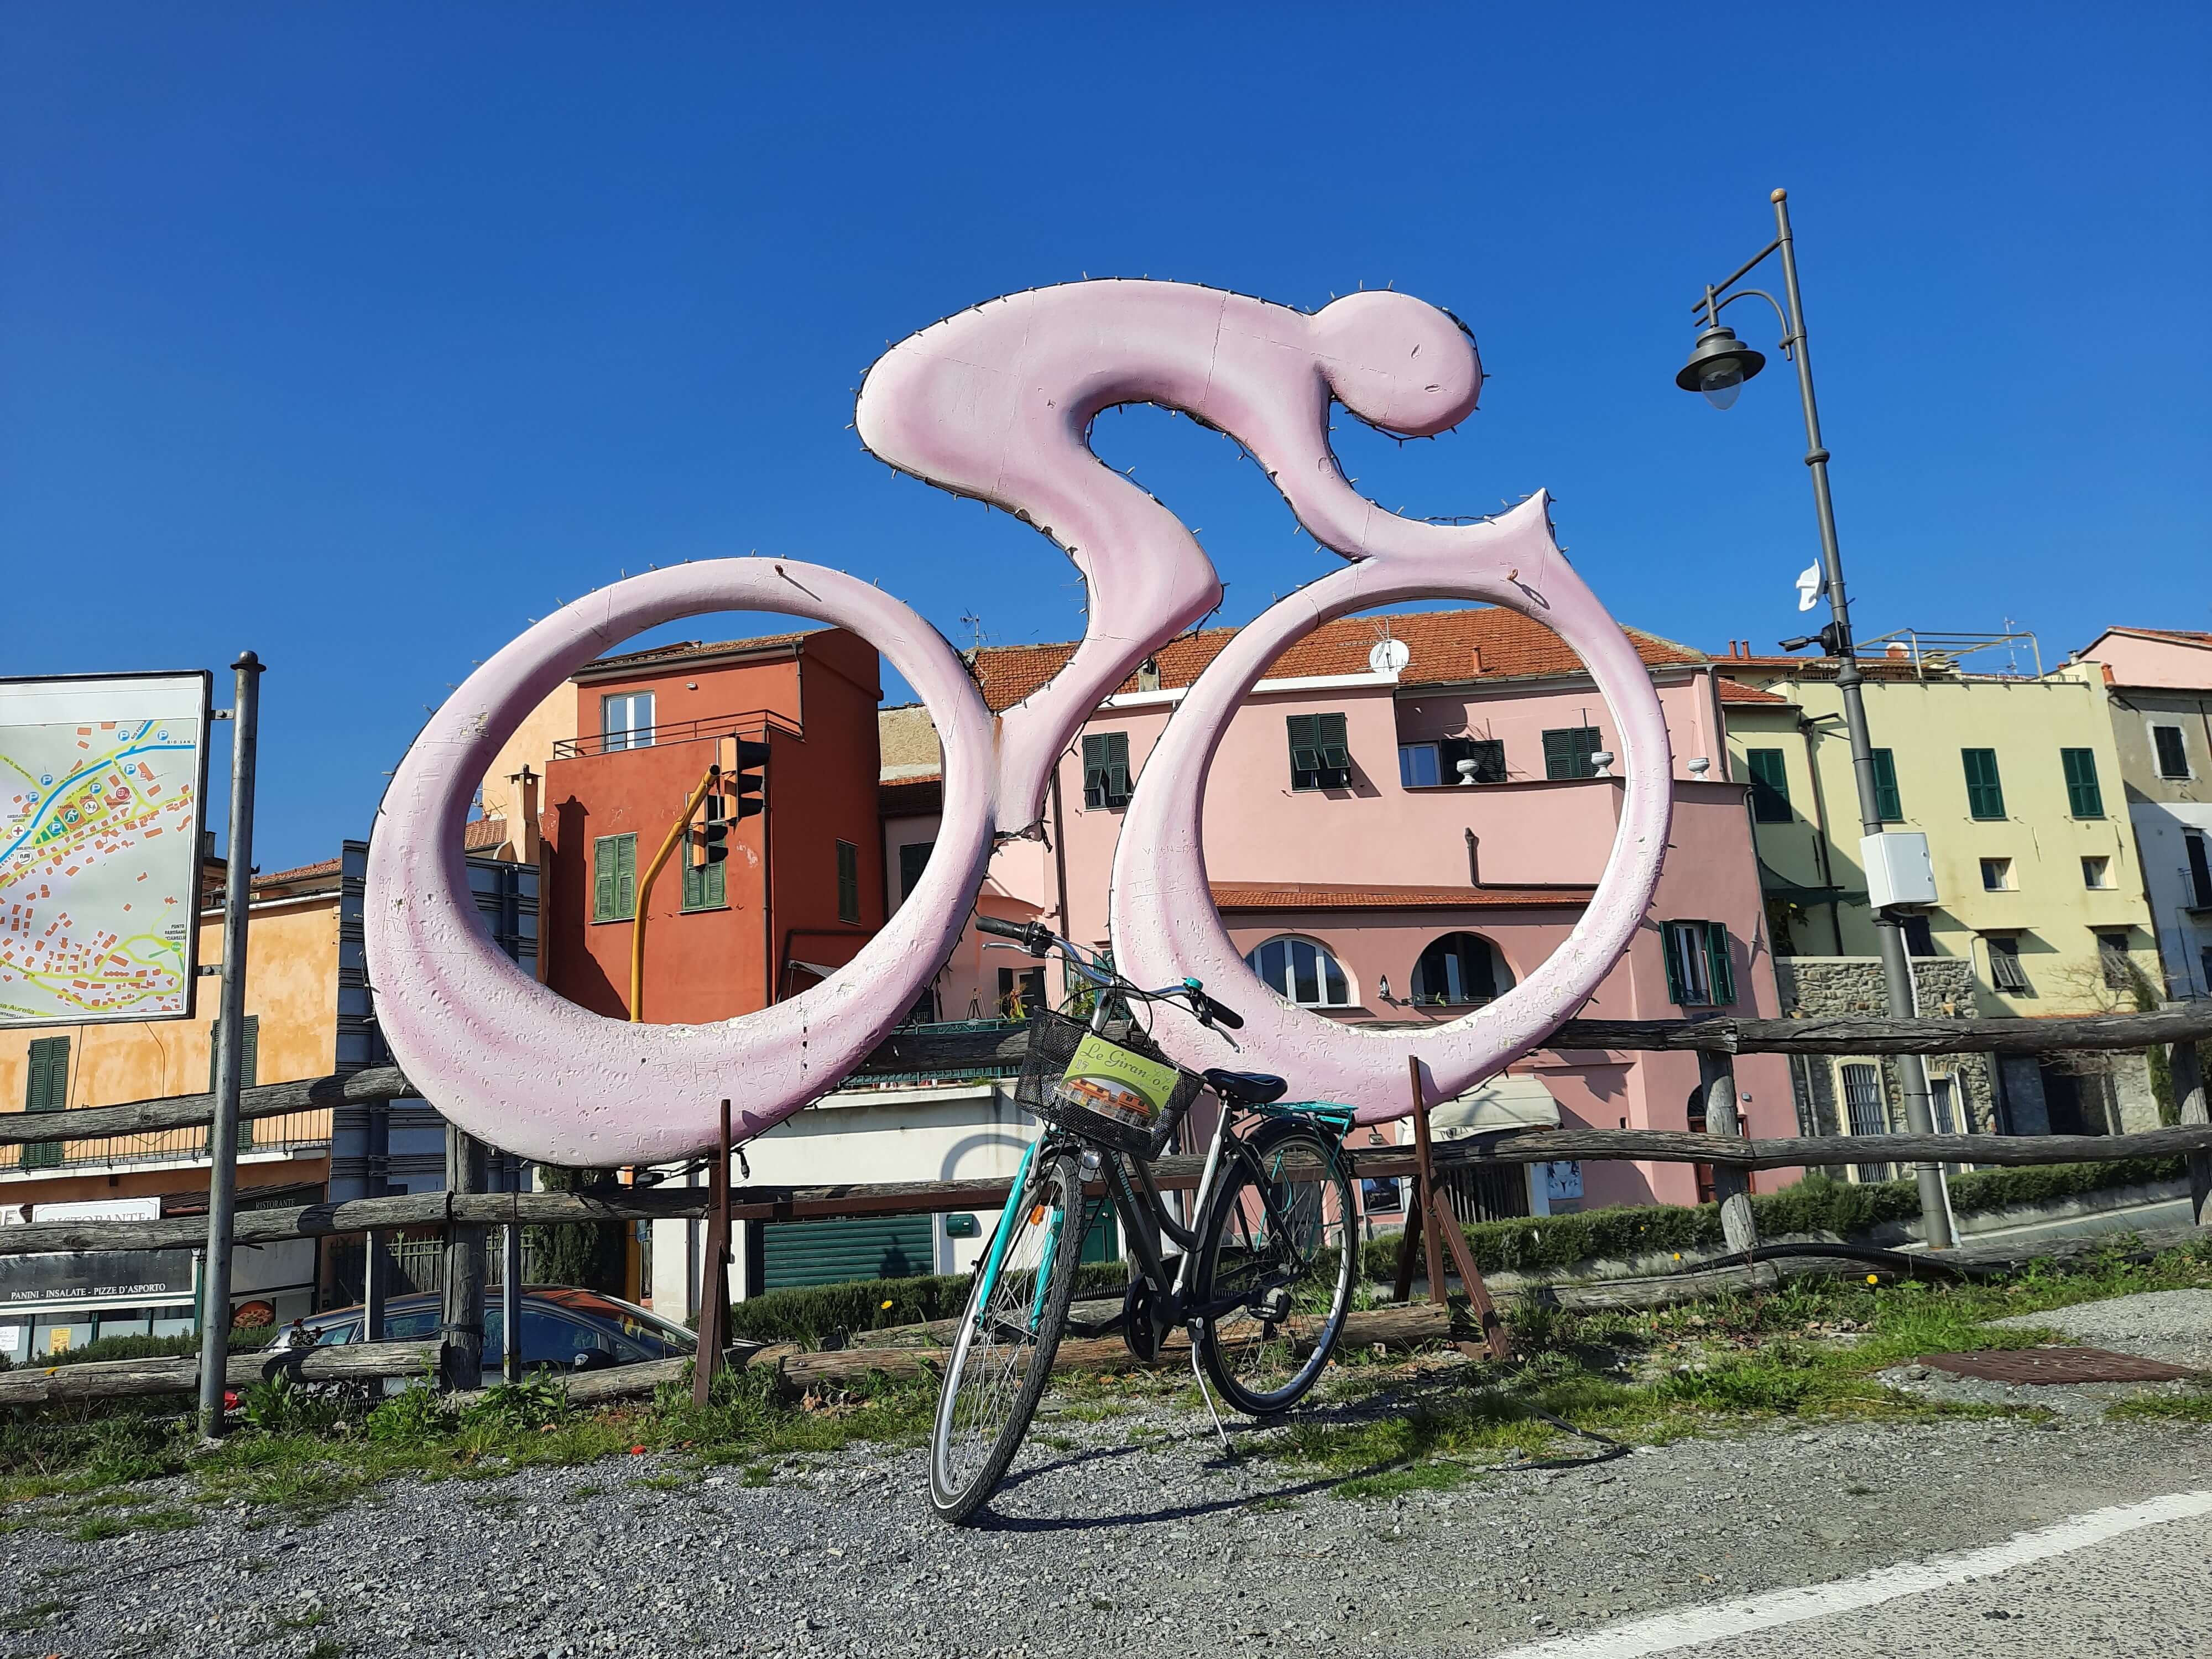 Ligurian Riviera bike path: from Imperia to Bussana Mare